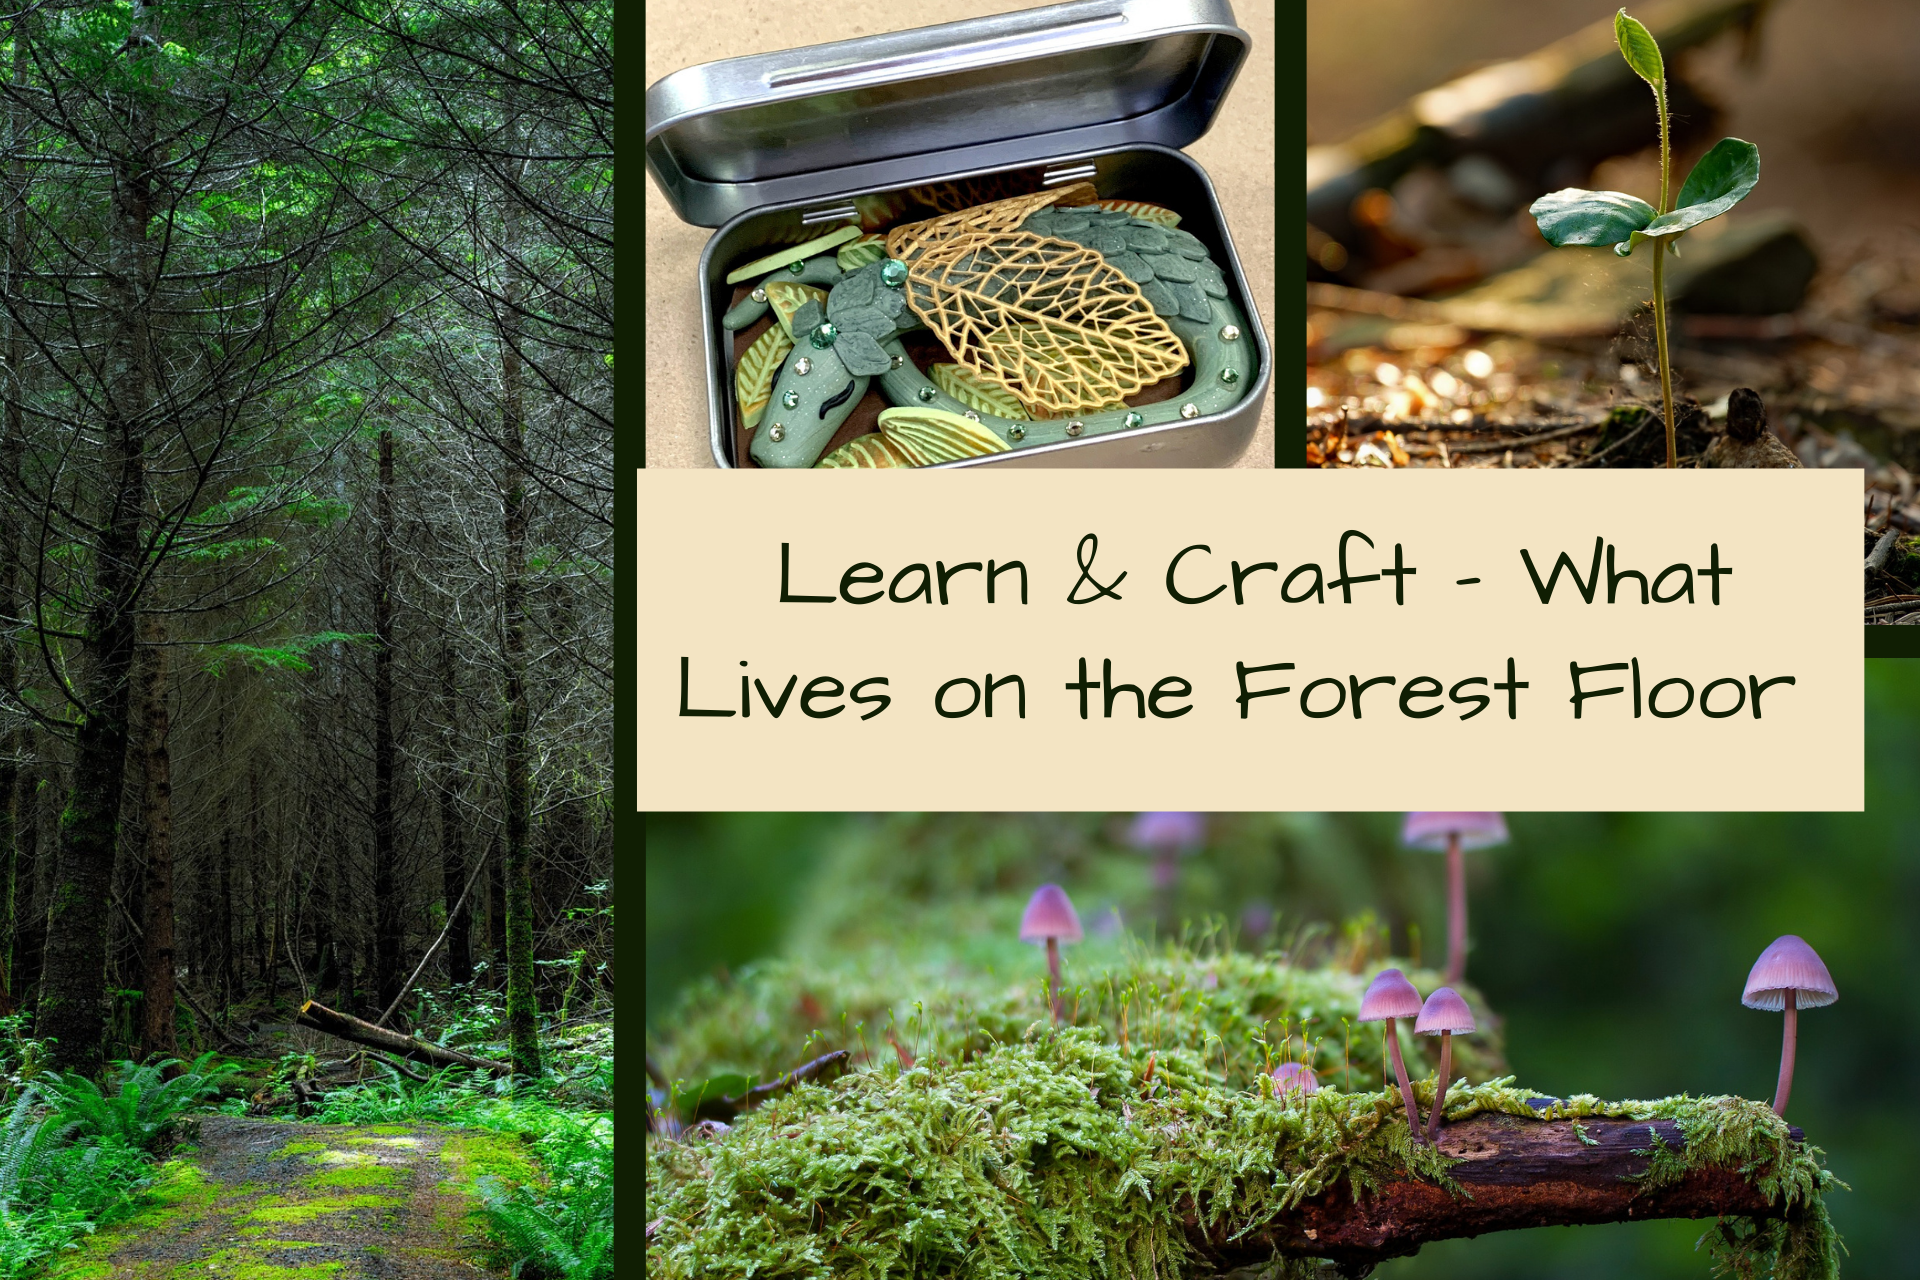 Learn and Craft - What Lives on the Forest Floor